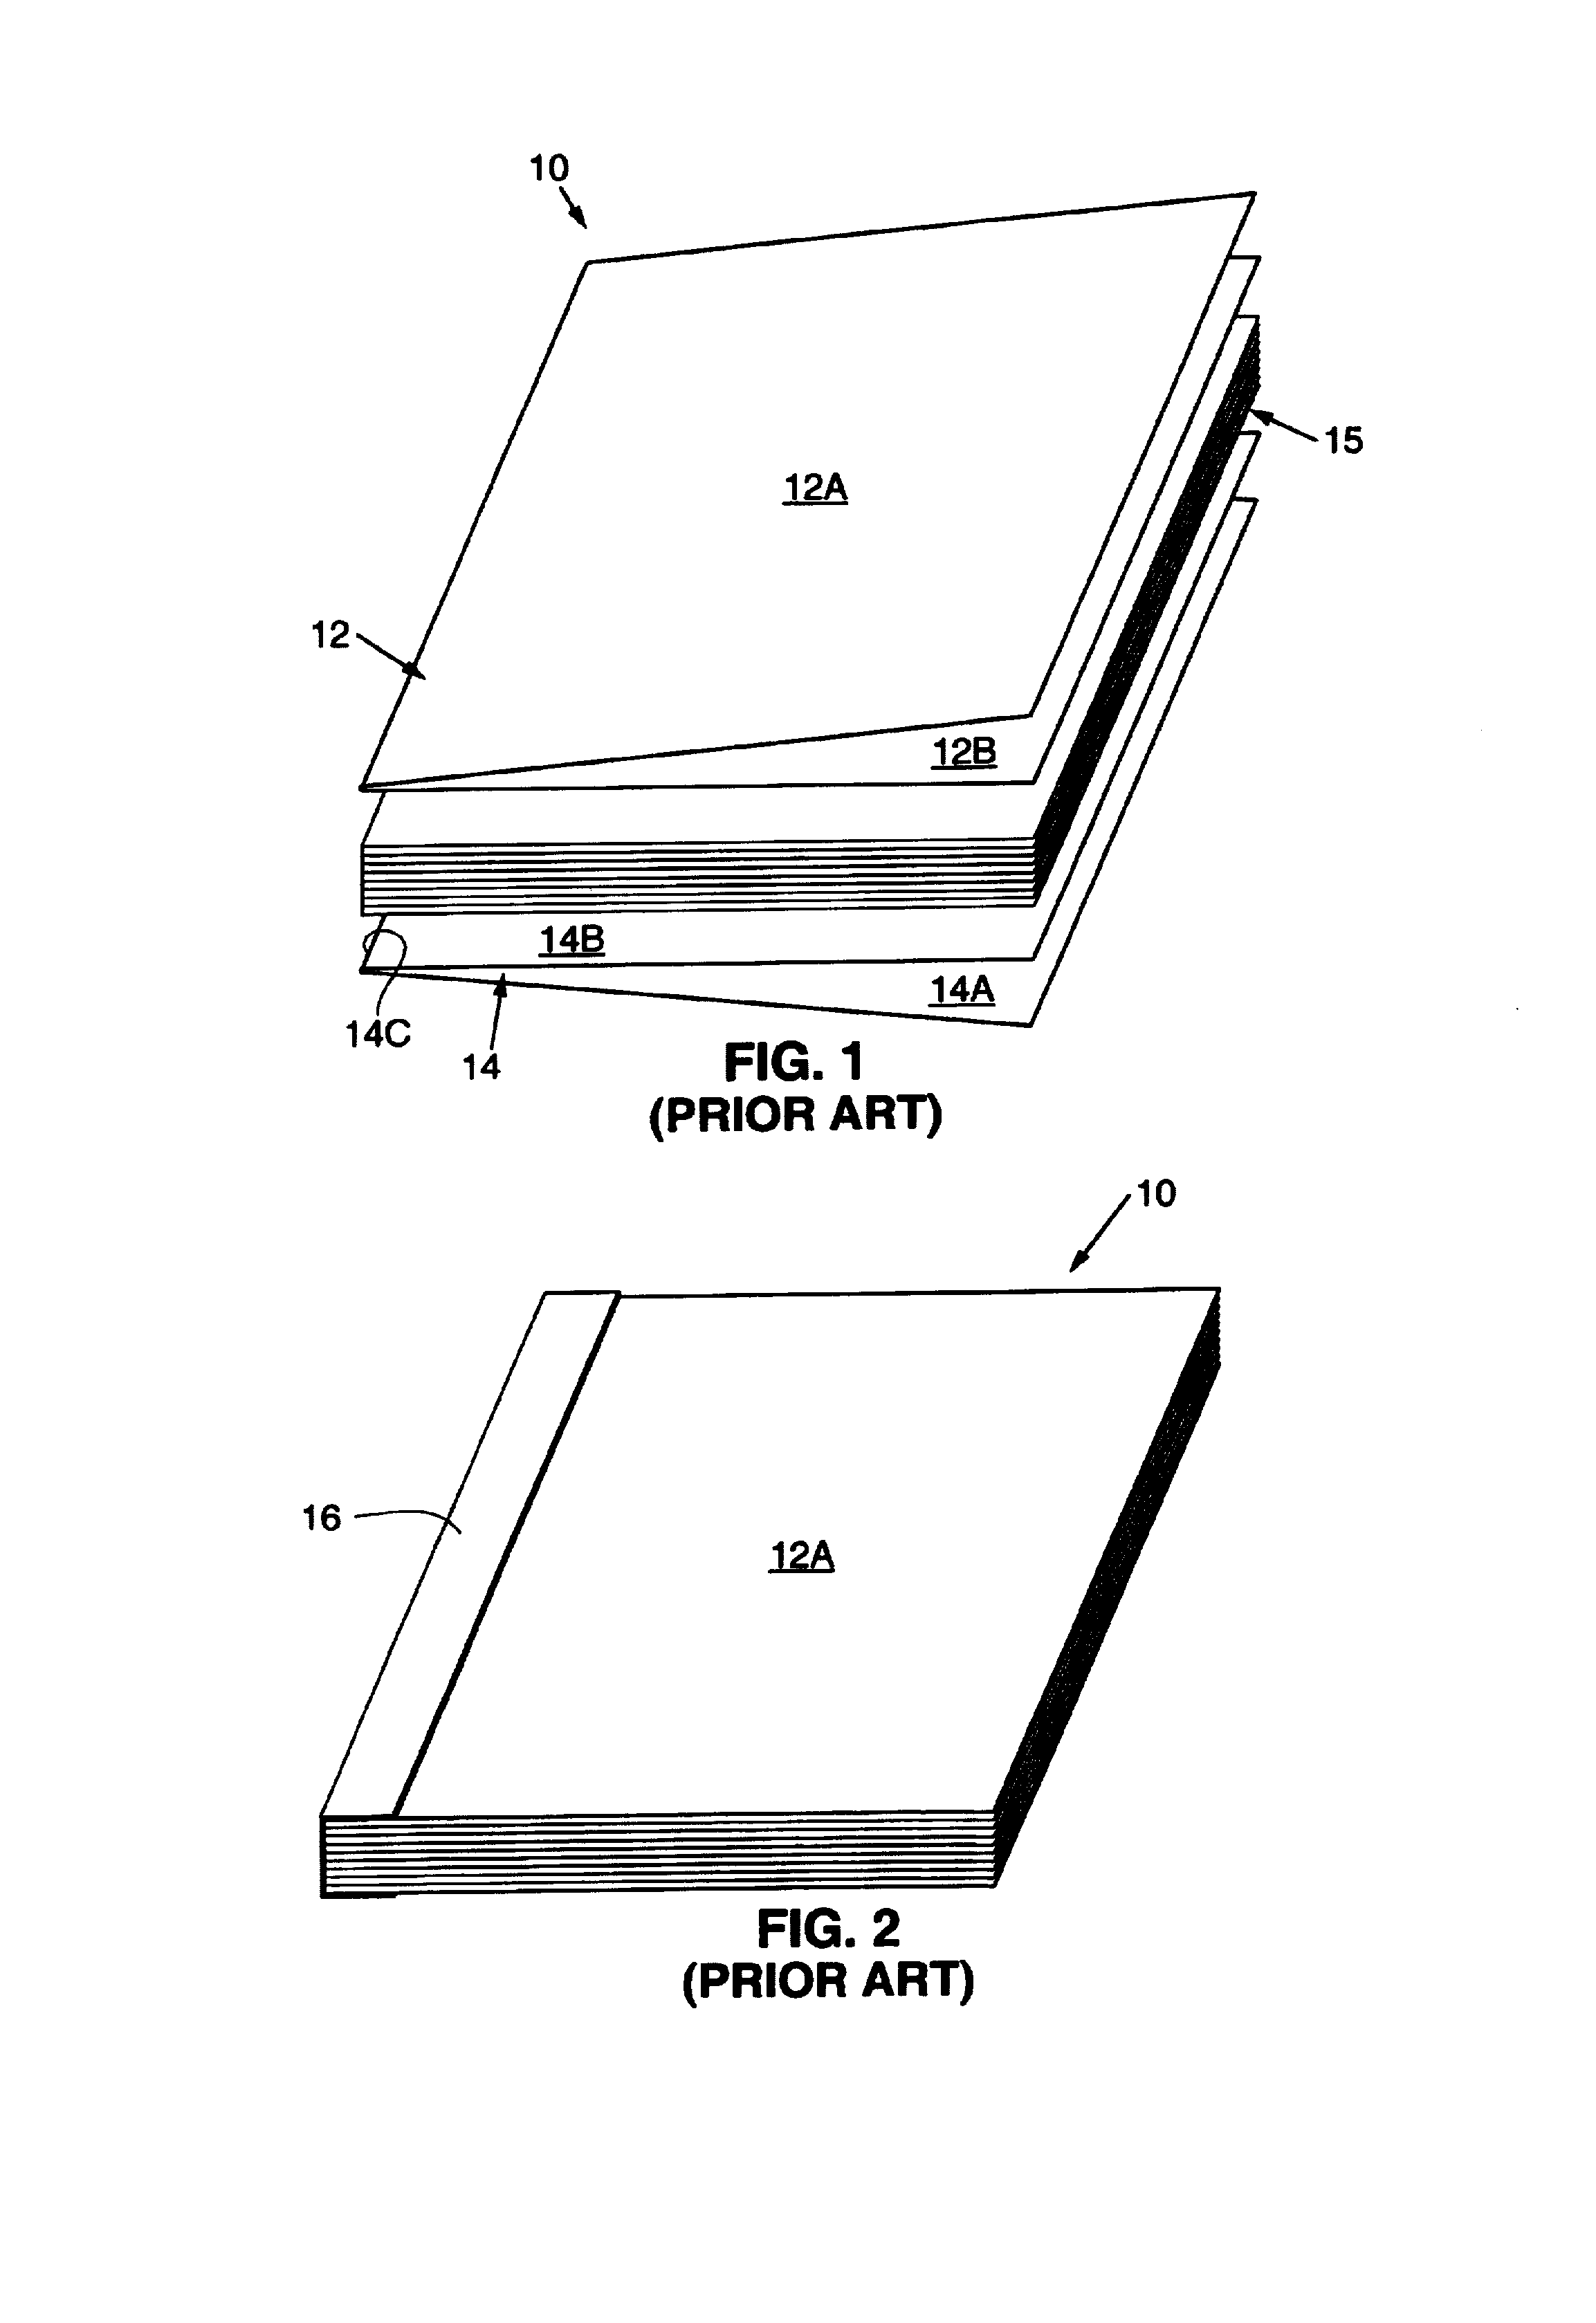 Guide apparatus for use in making a hardcover book